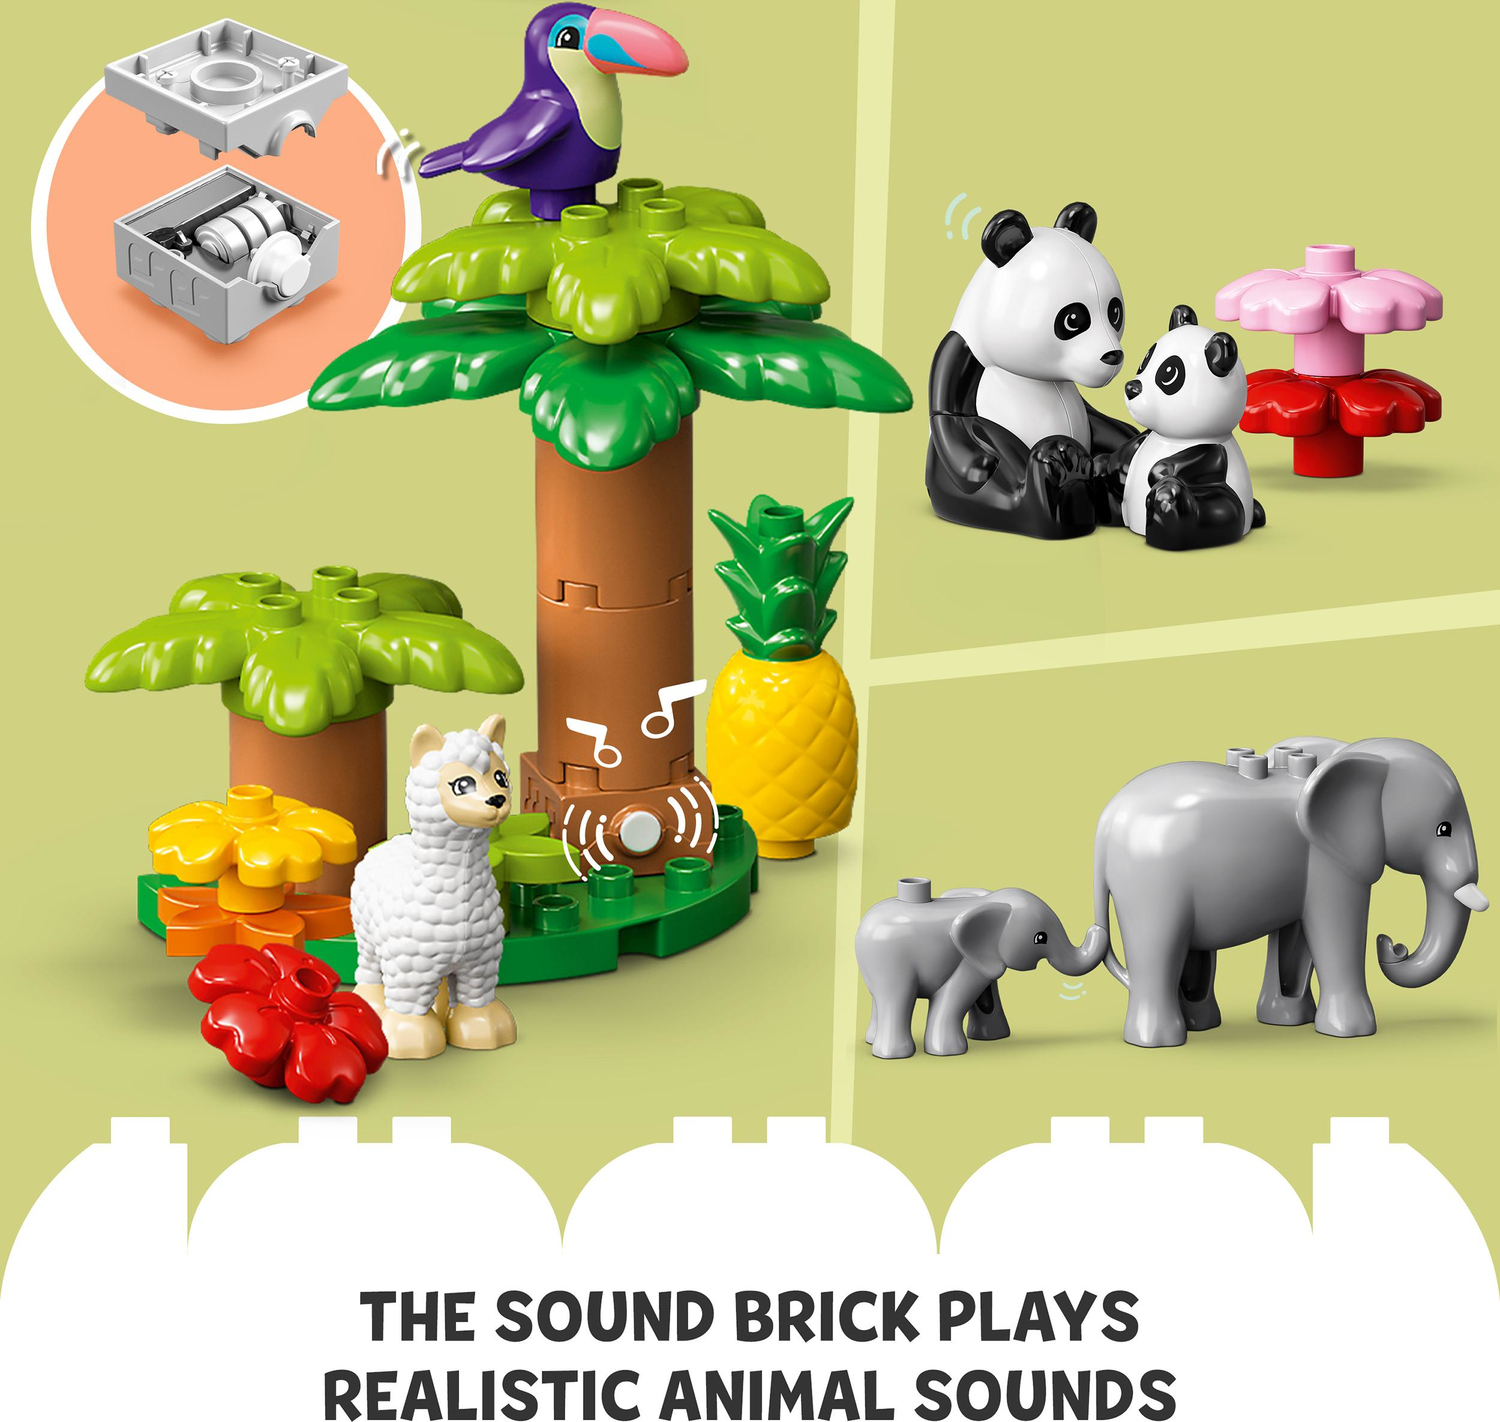 LEGO DUPLO Wild Animals of the World Toy Set – Awesome Toys Gifts